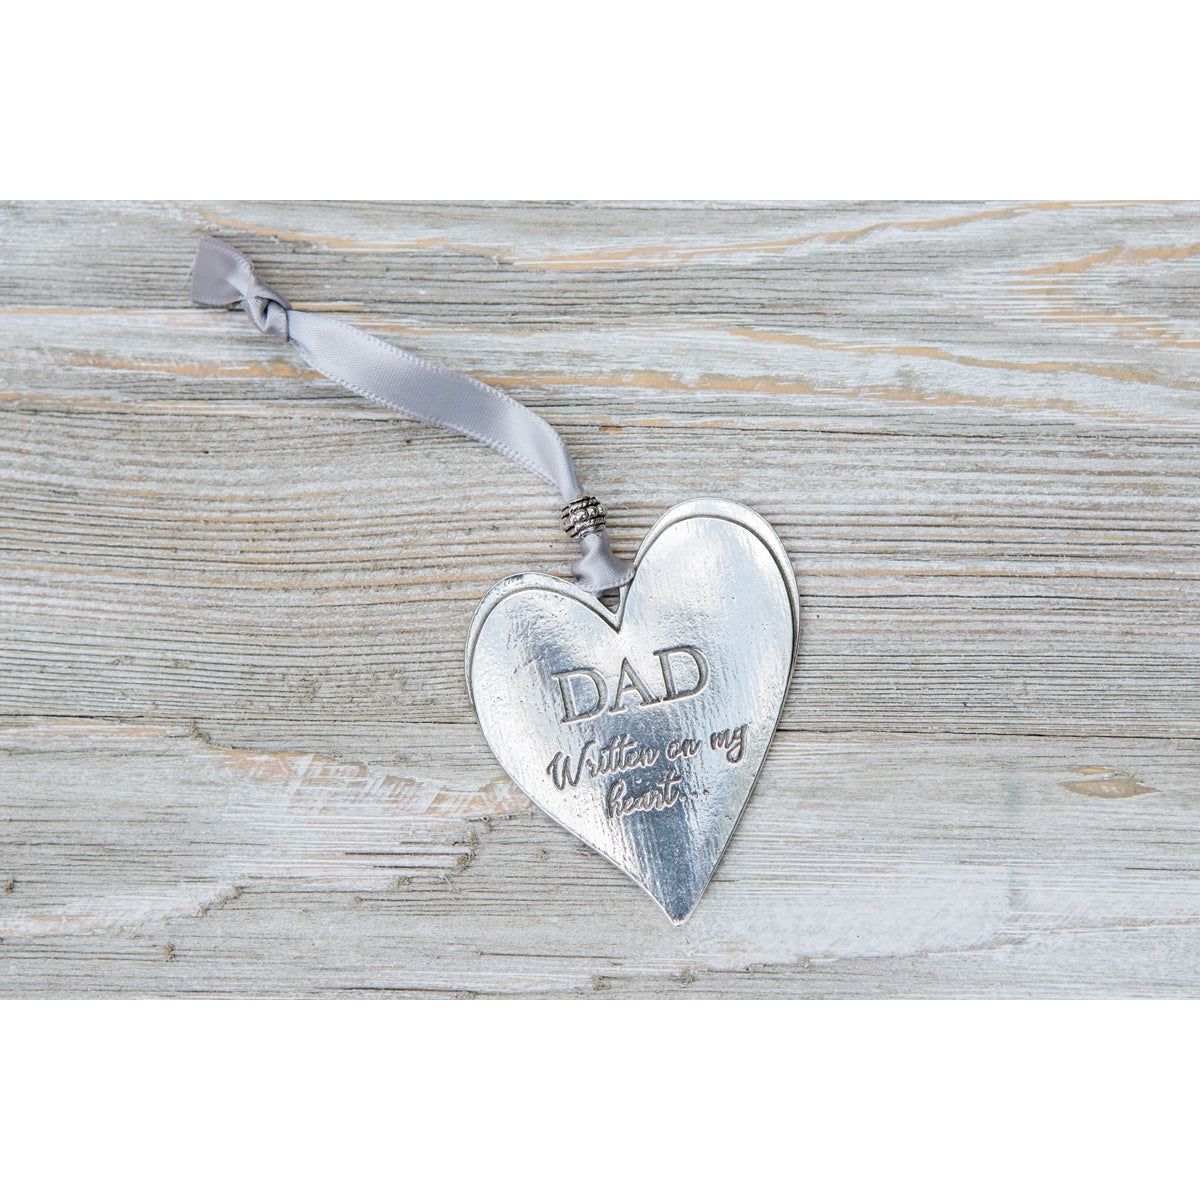 Pewter heart with gray satin for hanging.